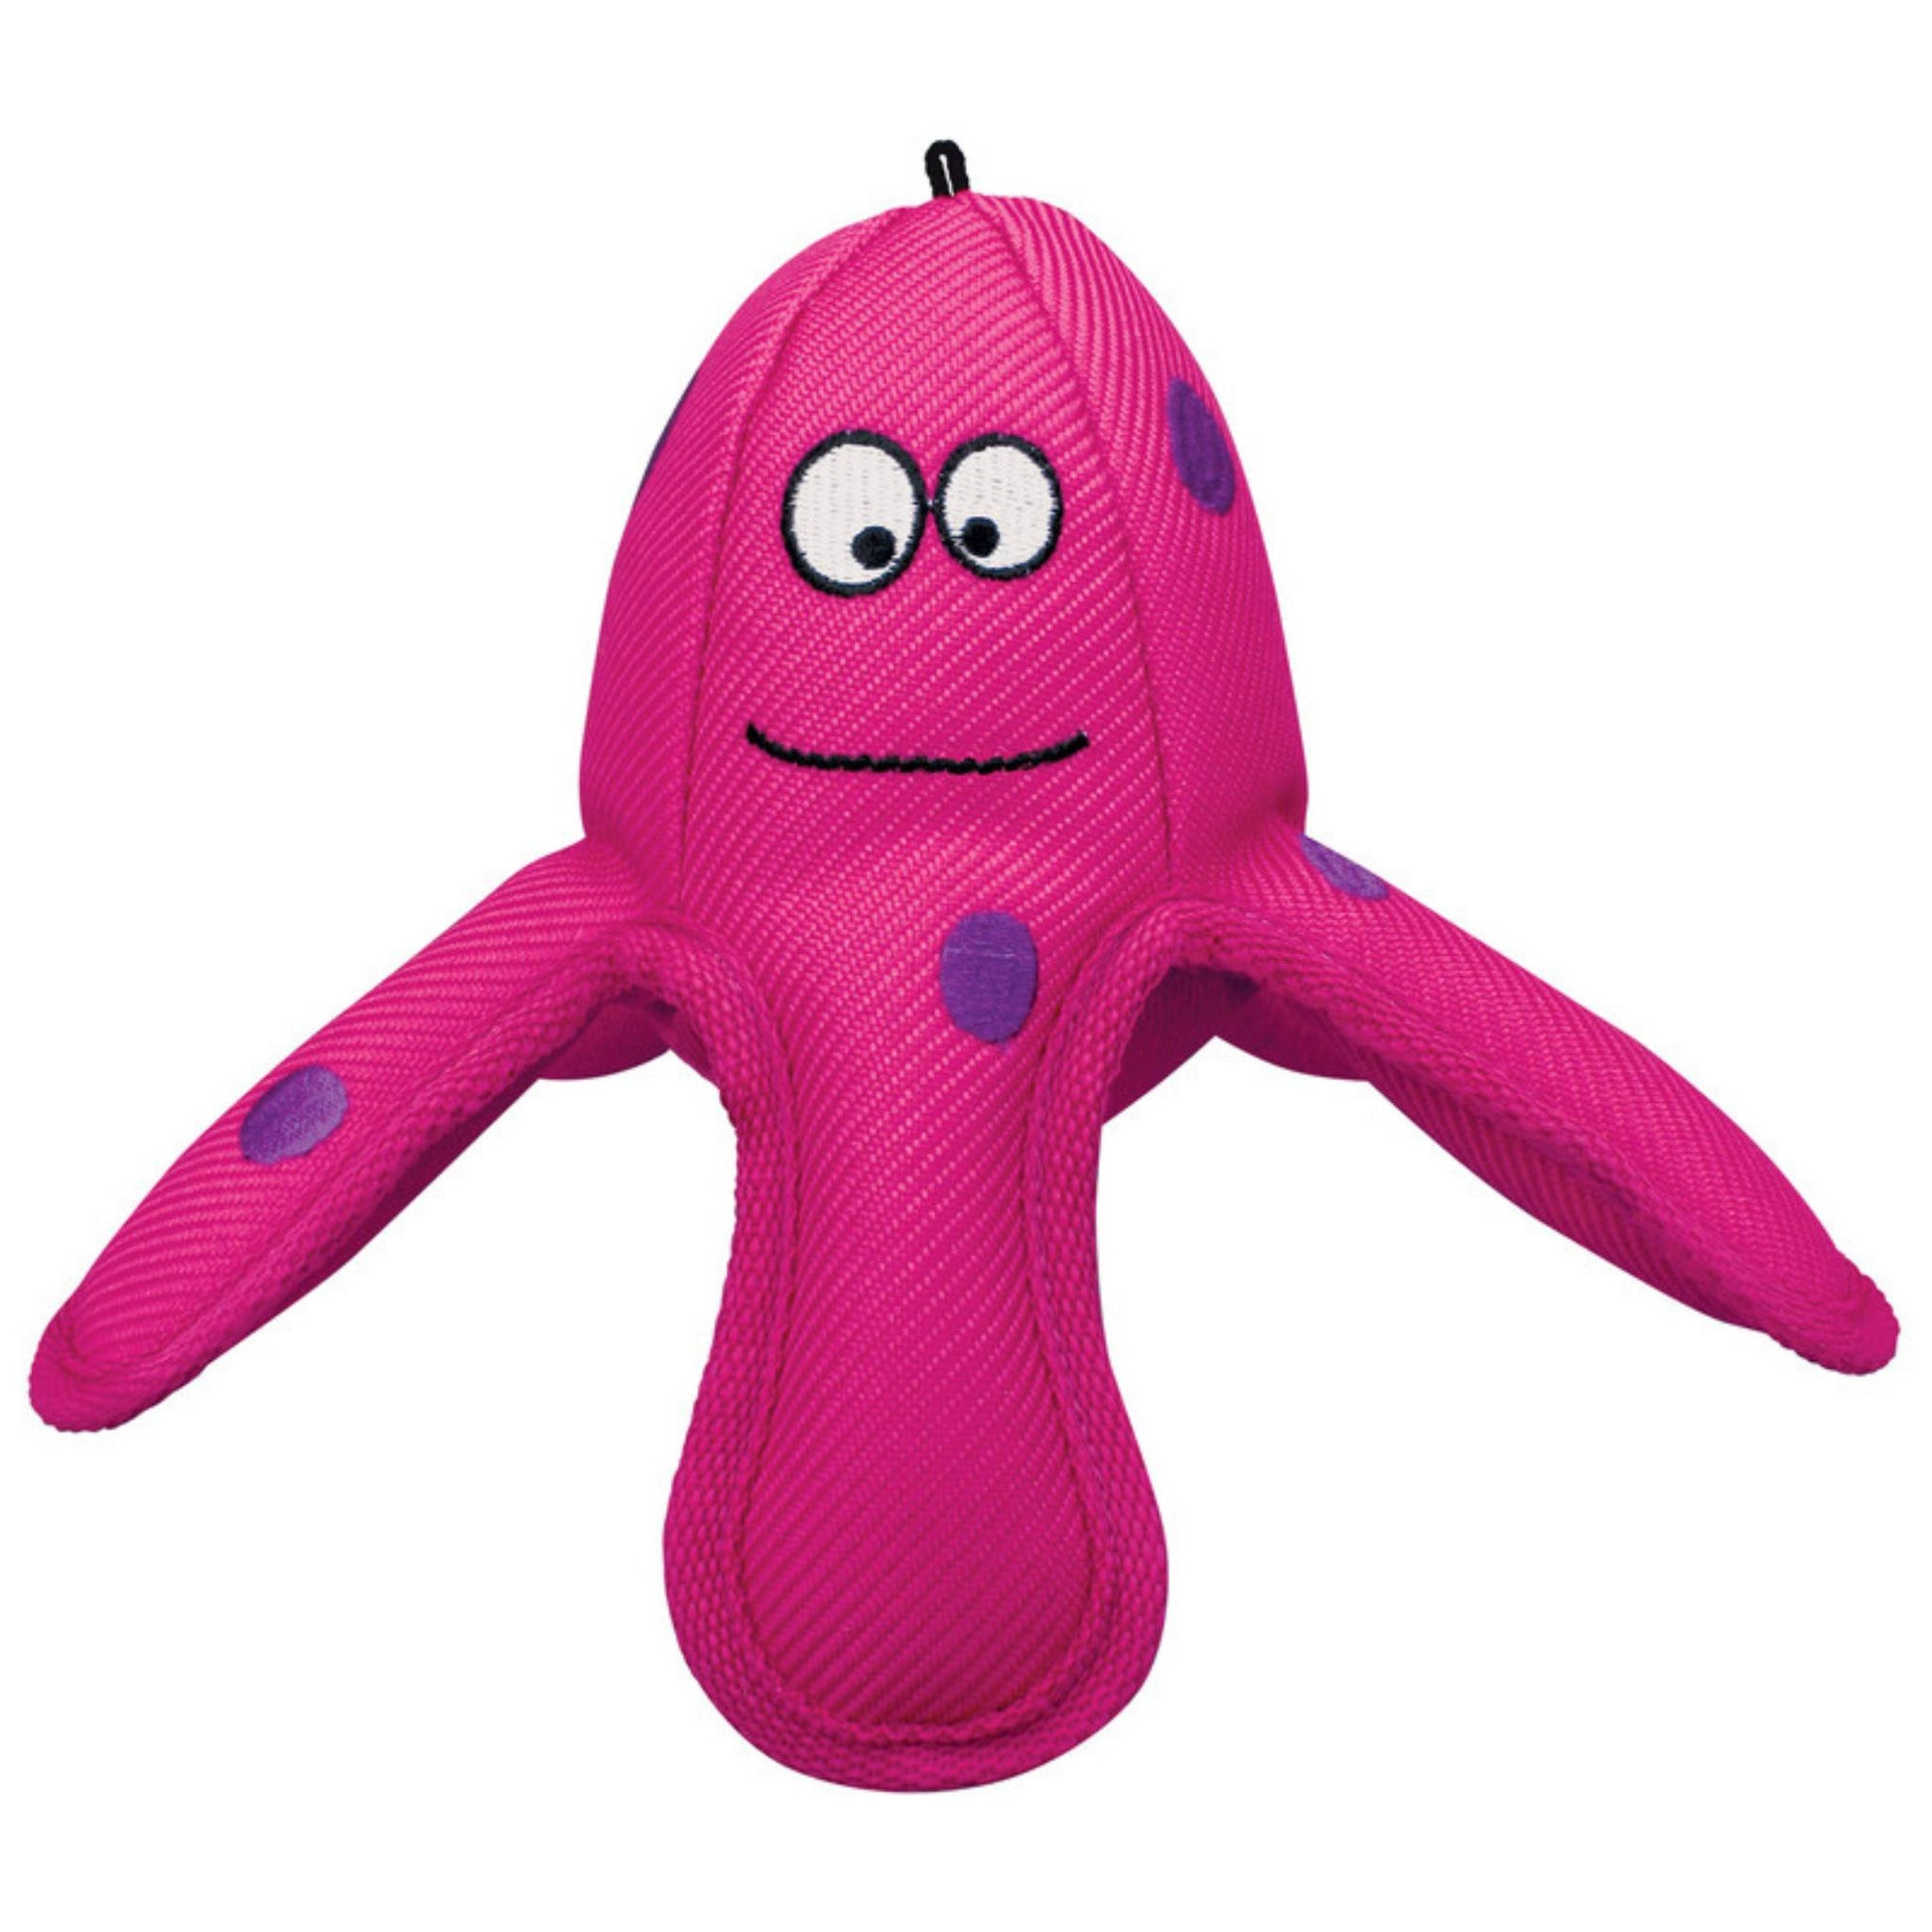 KONG Belly Flops Octopus Dog Toy